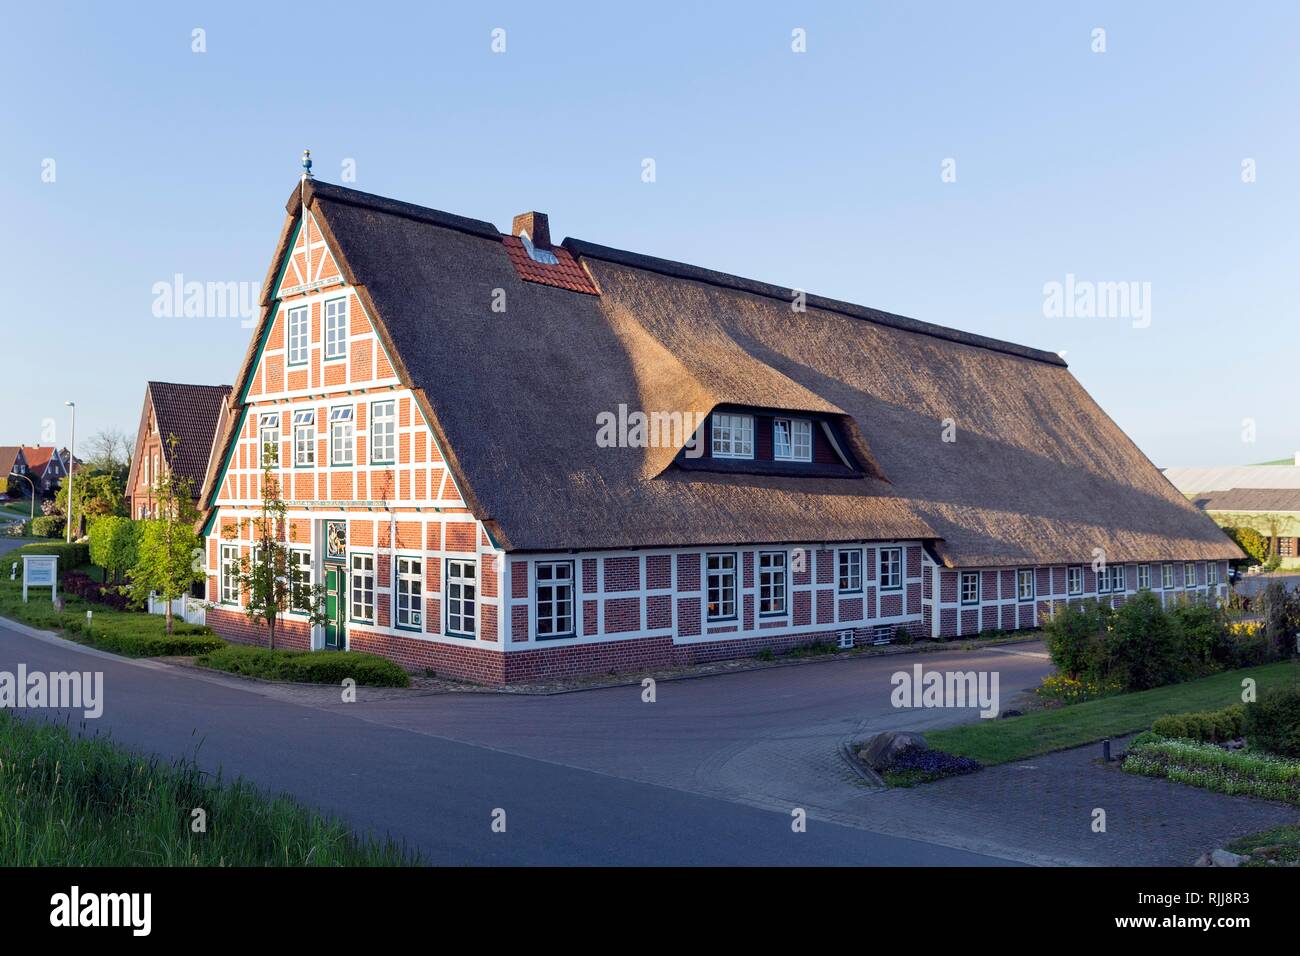 Altländer farmhouse from 1712, half-timbered house with thatched roof, Estebrügge, Jork, Altes Land, Lower Saxony, Germany Stock Photo